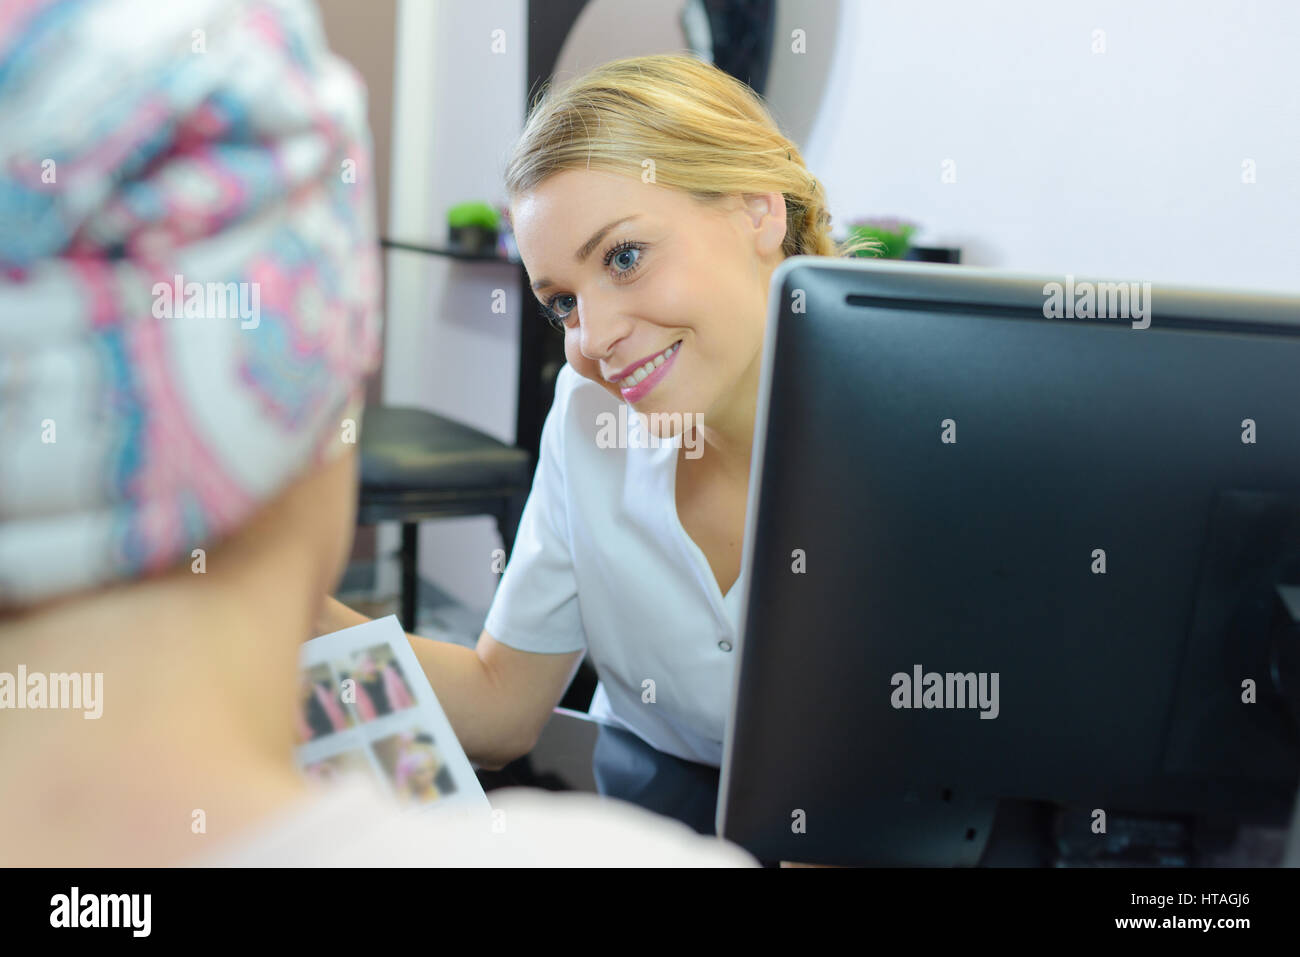 at a health appointment Stock Photo